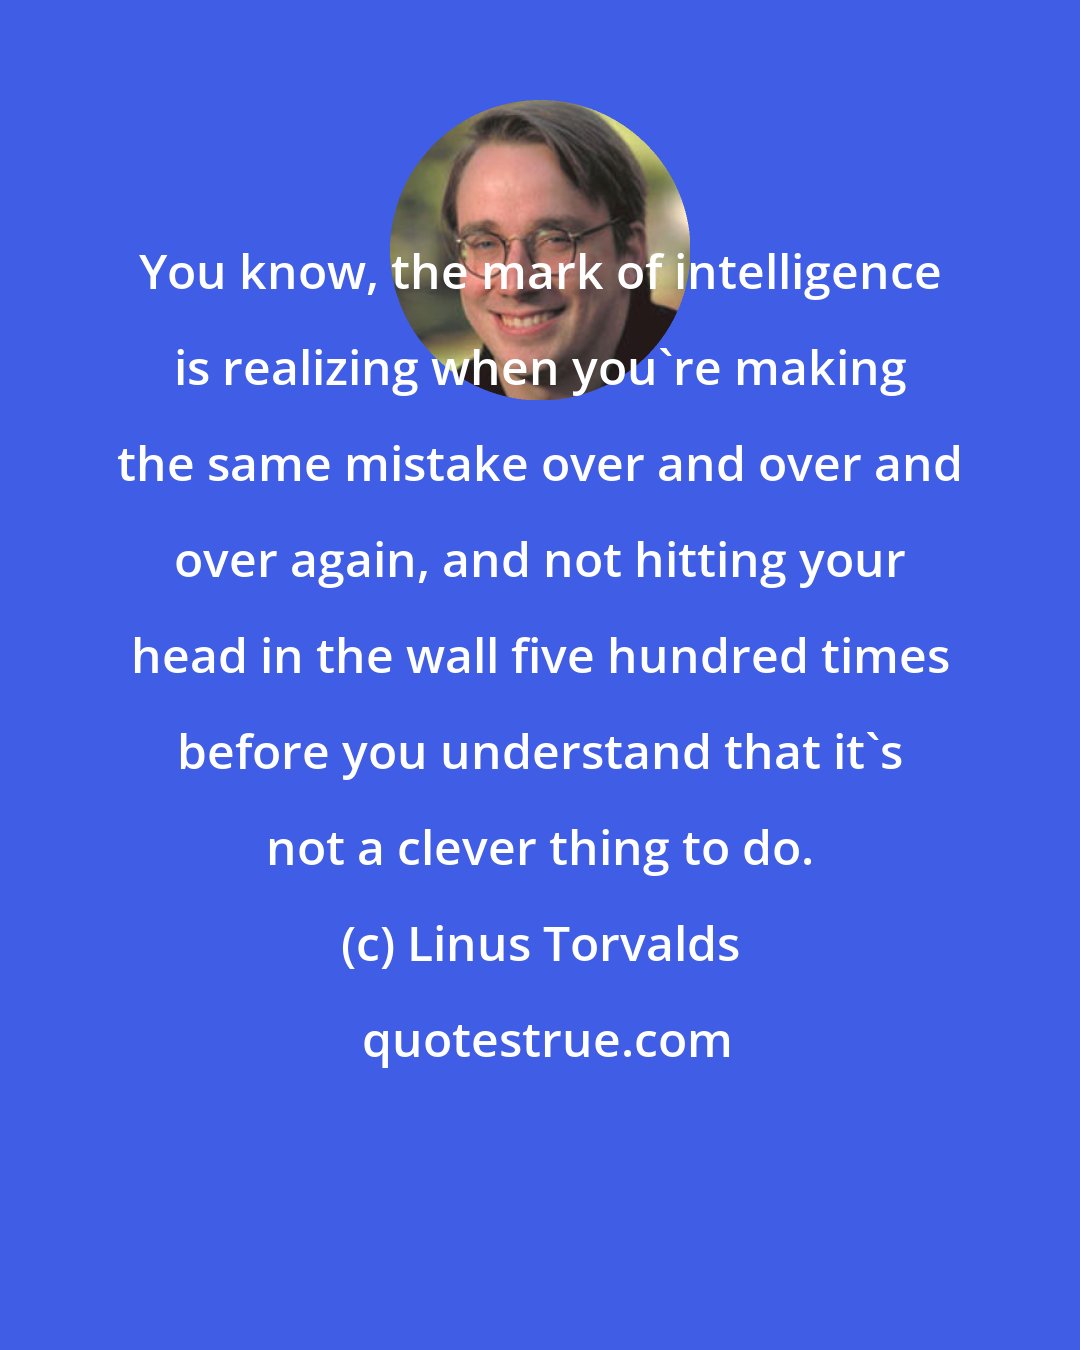 Linus Torvalds: You know, the mark of intelligence is realizing when you're making the same mistake over and over and over again, and not hitting your head in the wall five hundred times before you understand that it's not a clever thing to do.